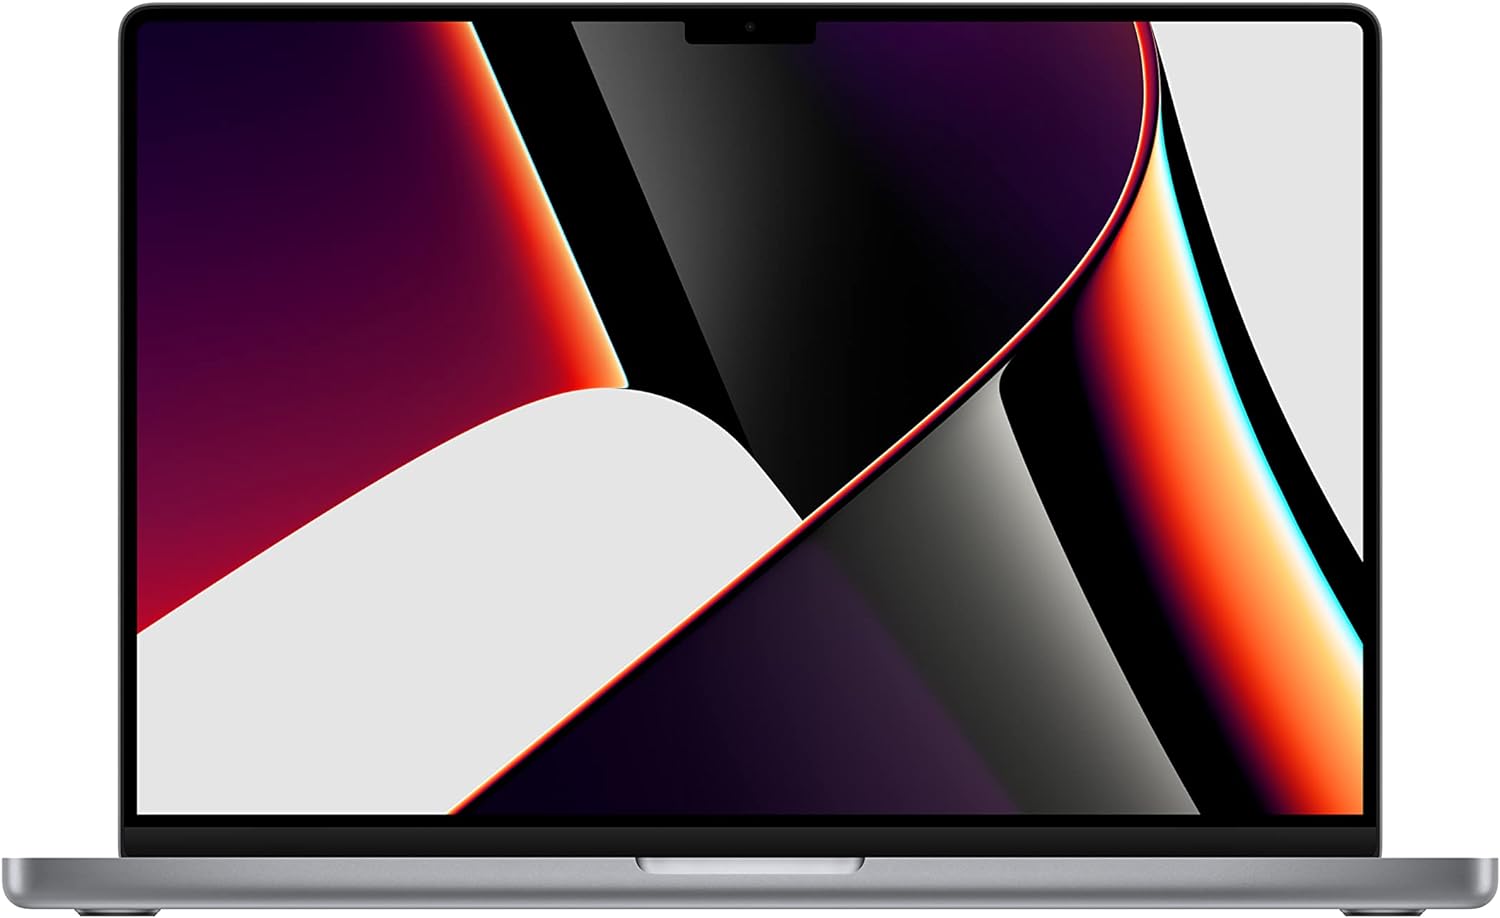 Apple MacBook Pro M1 Chip with 10 Core CPU, 32 Core GPU, 1TB SSD, 32GB RAM, 16 Inch XDR 120Hz Display, MacOS - Space Gray